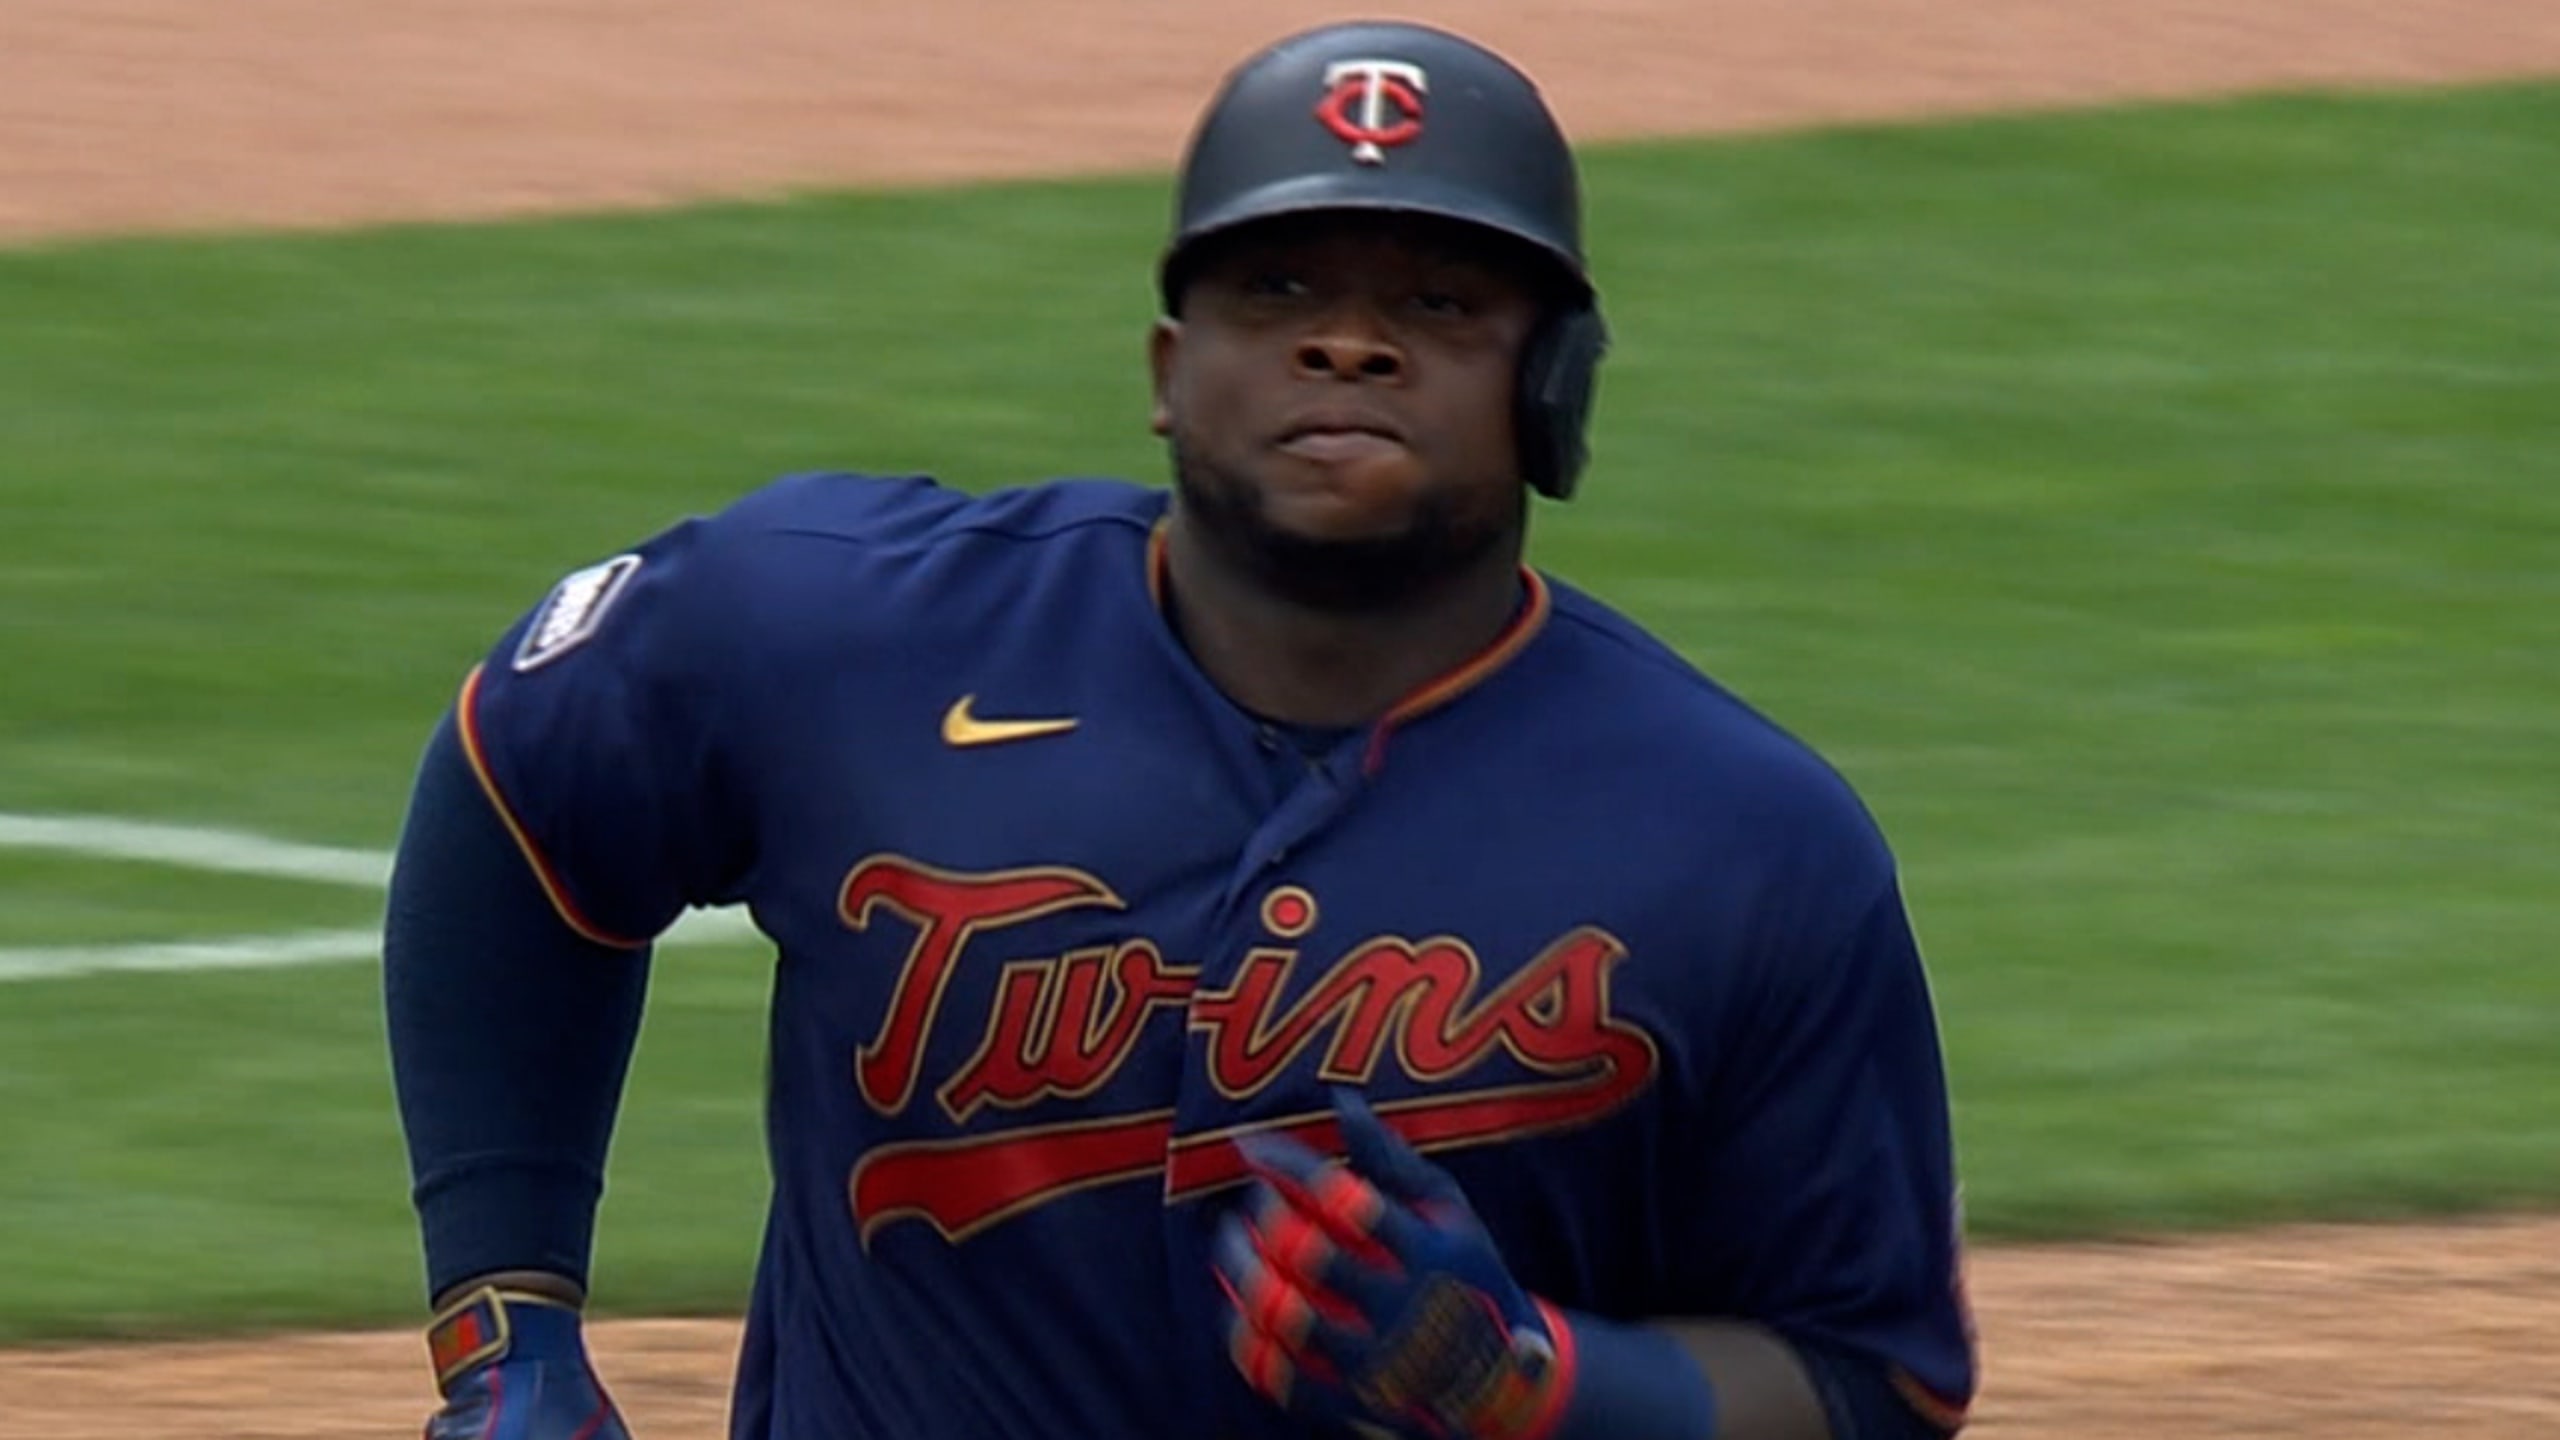 Miguel Sano records video message for fans moments before Tommy